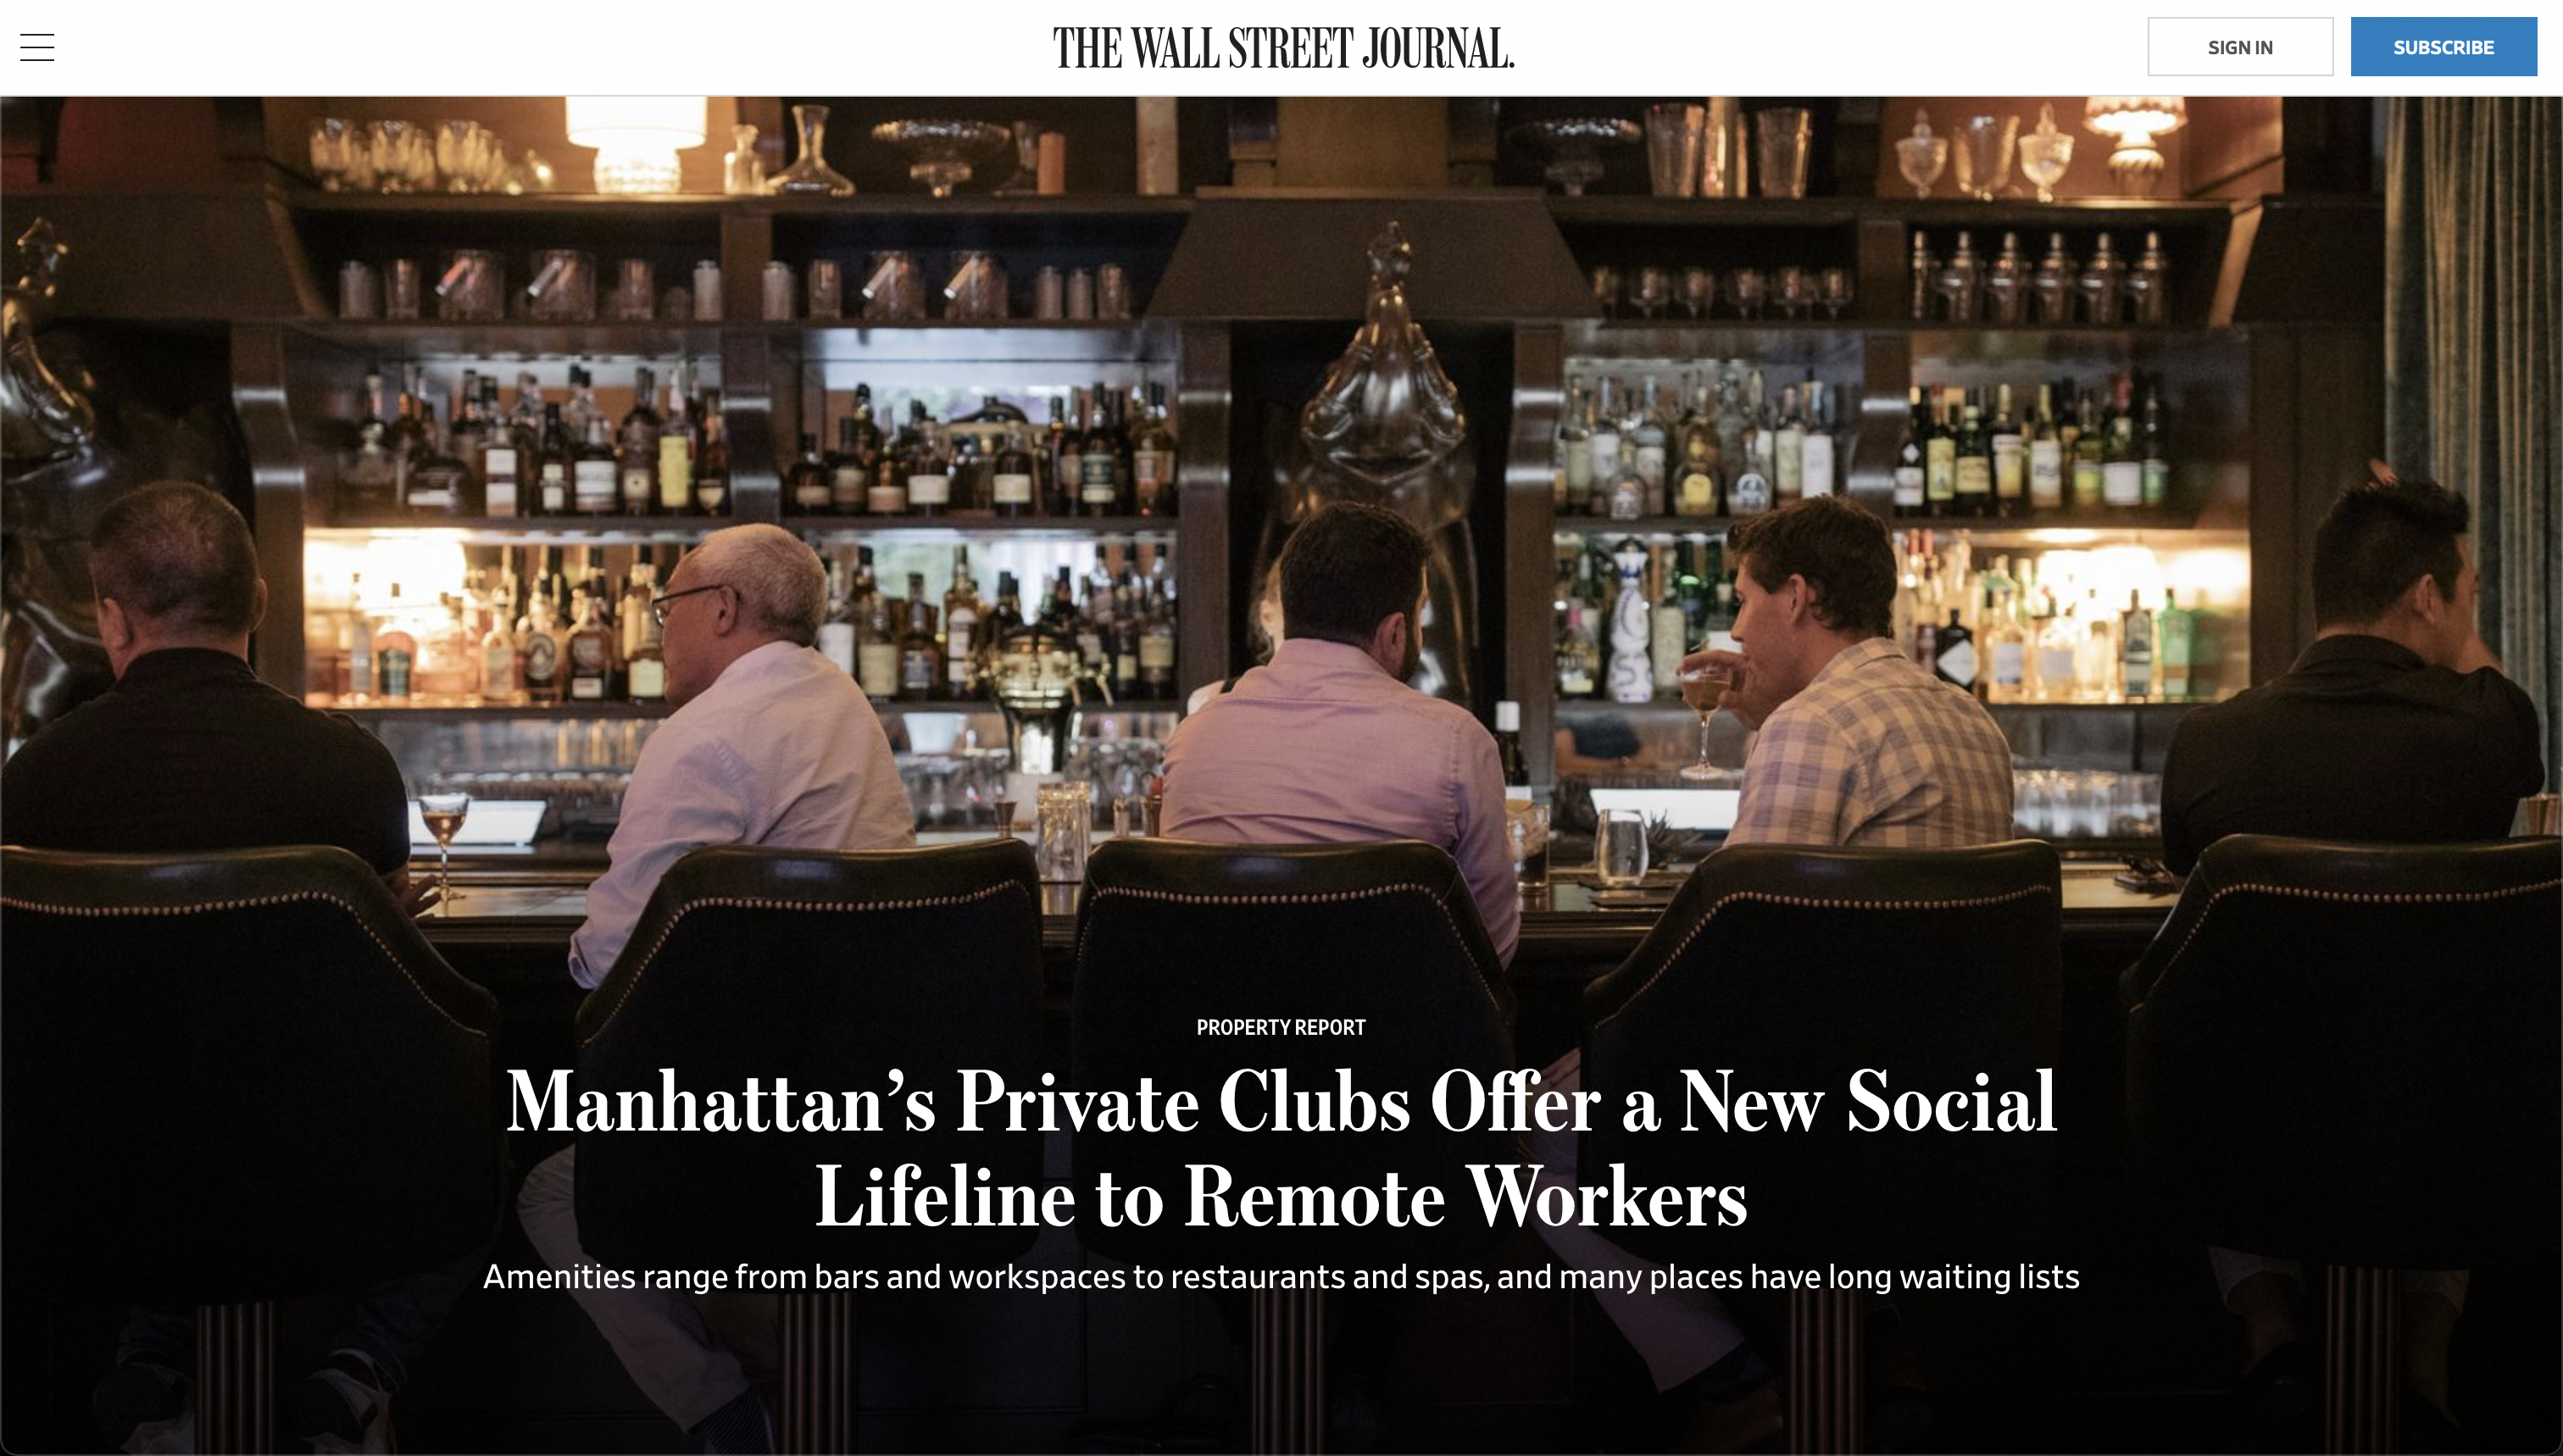 Thumbnail of for The Wall Street Journal: Manhattan’s Private Clubs Offer a New Social Lifeline to Remote Workers 